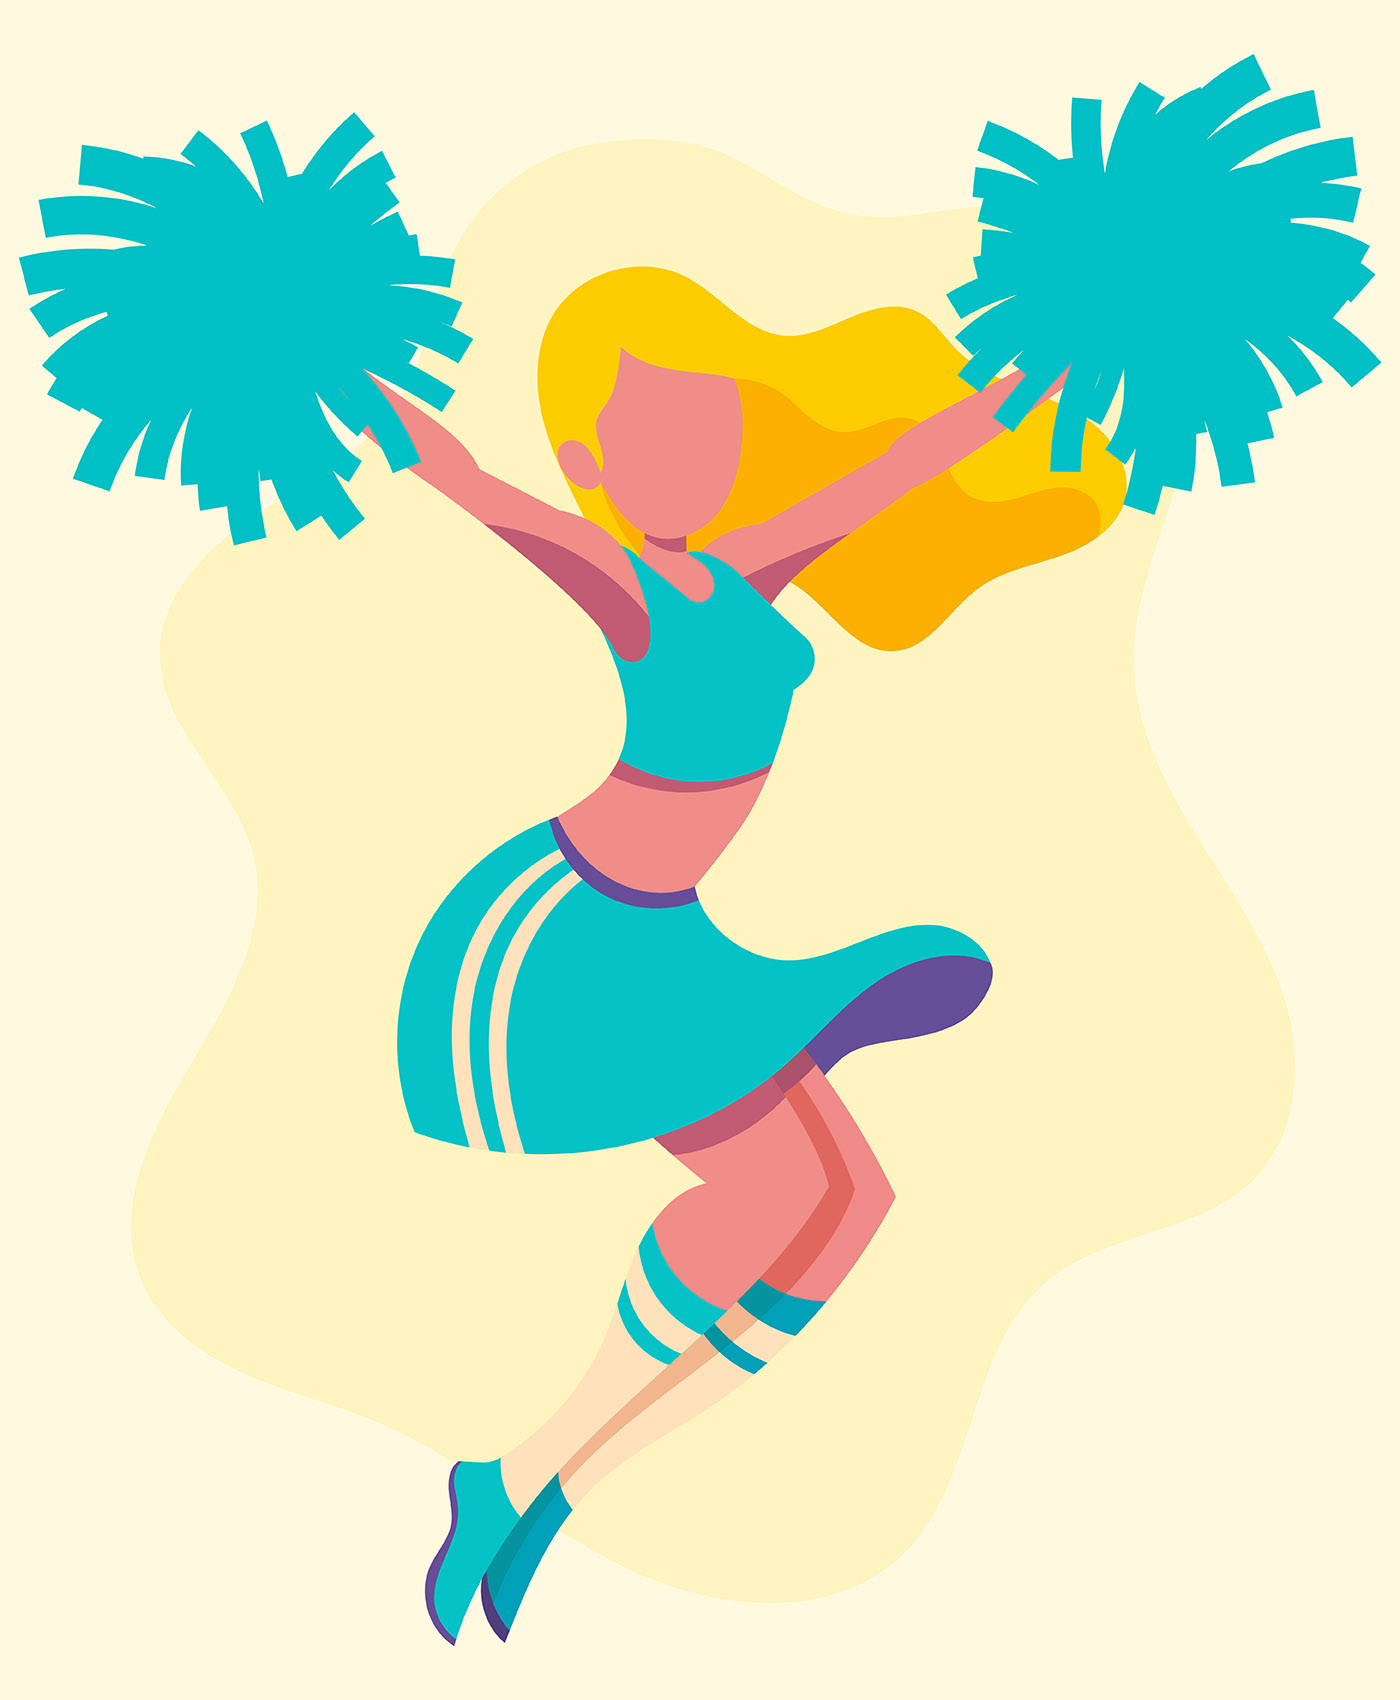 Download the Cheerleader Illustration 259355 royalty-free Vector from Vecte...